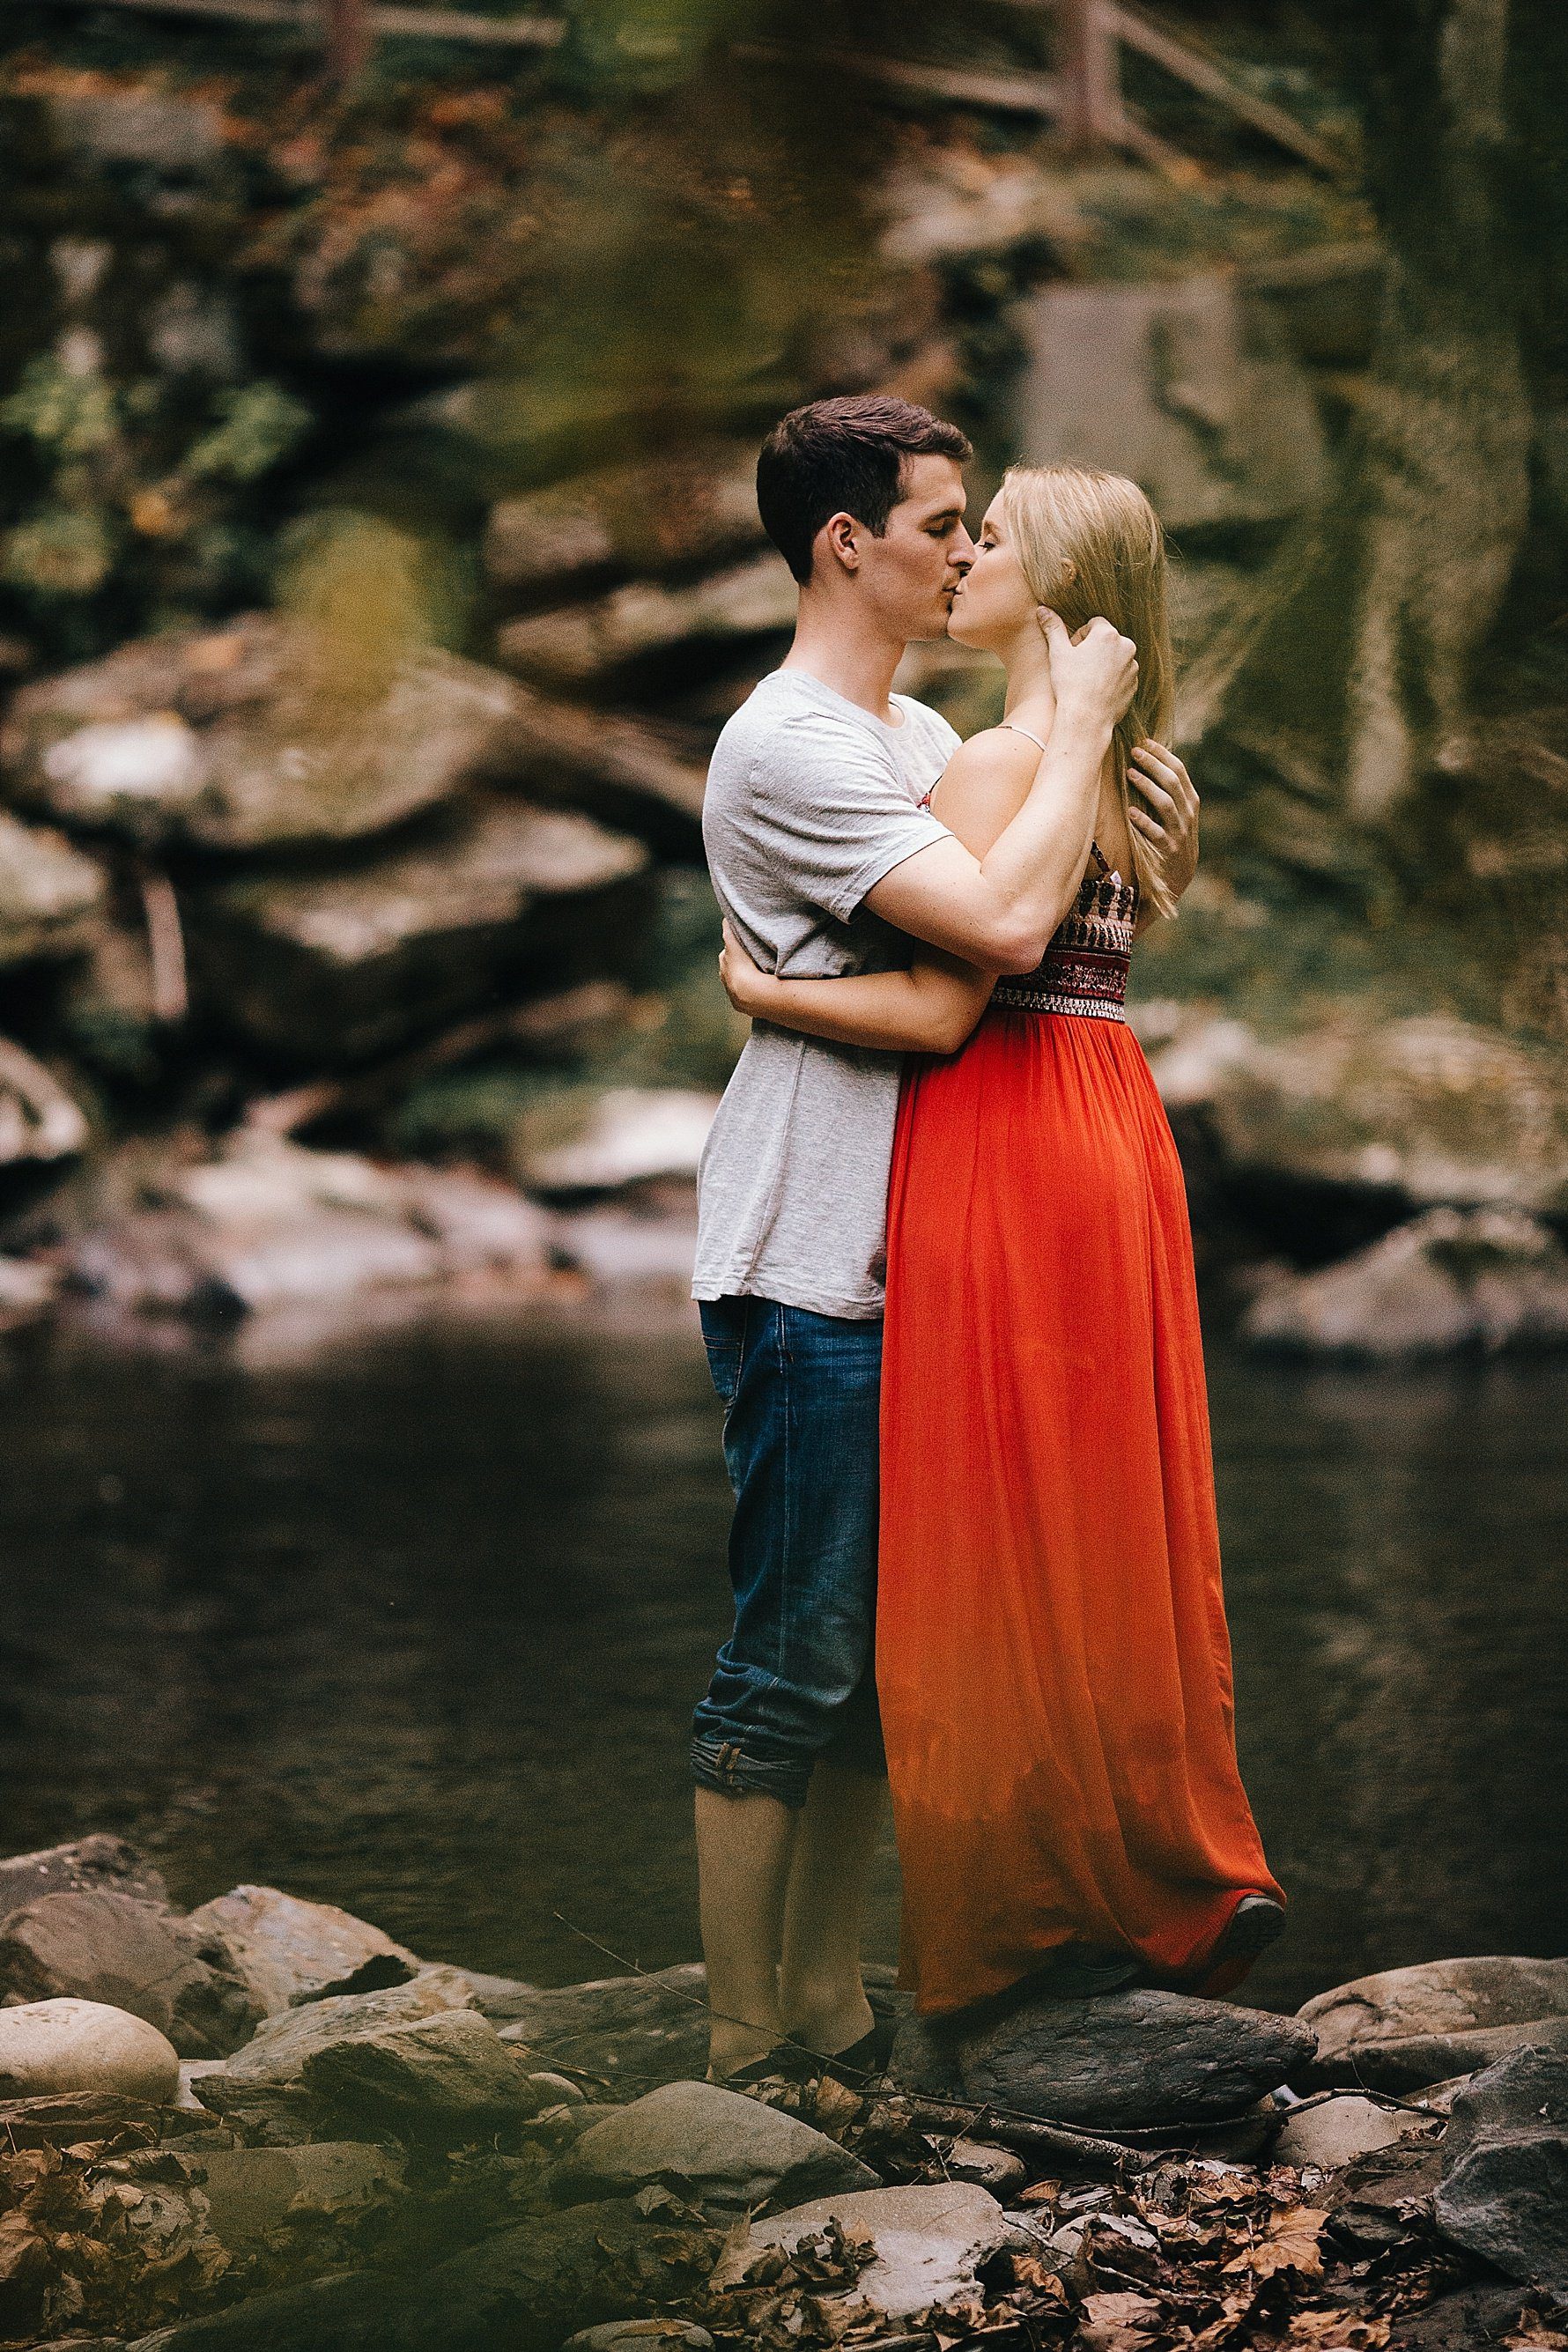 Knoxville Engagement Photographers | Erin Morrison Photography www.erinmorrisonphotography.com